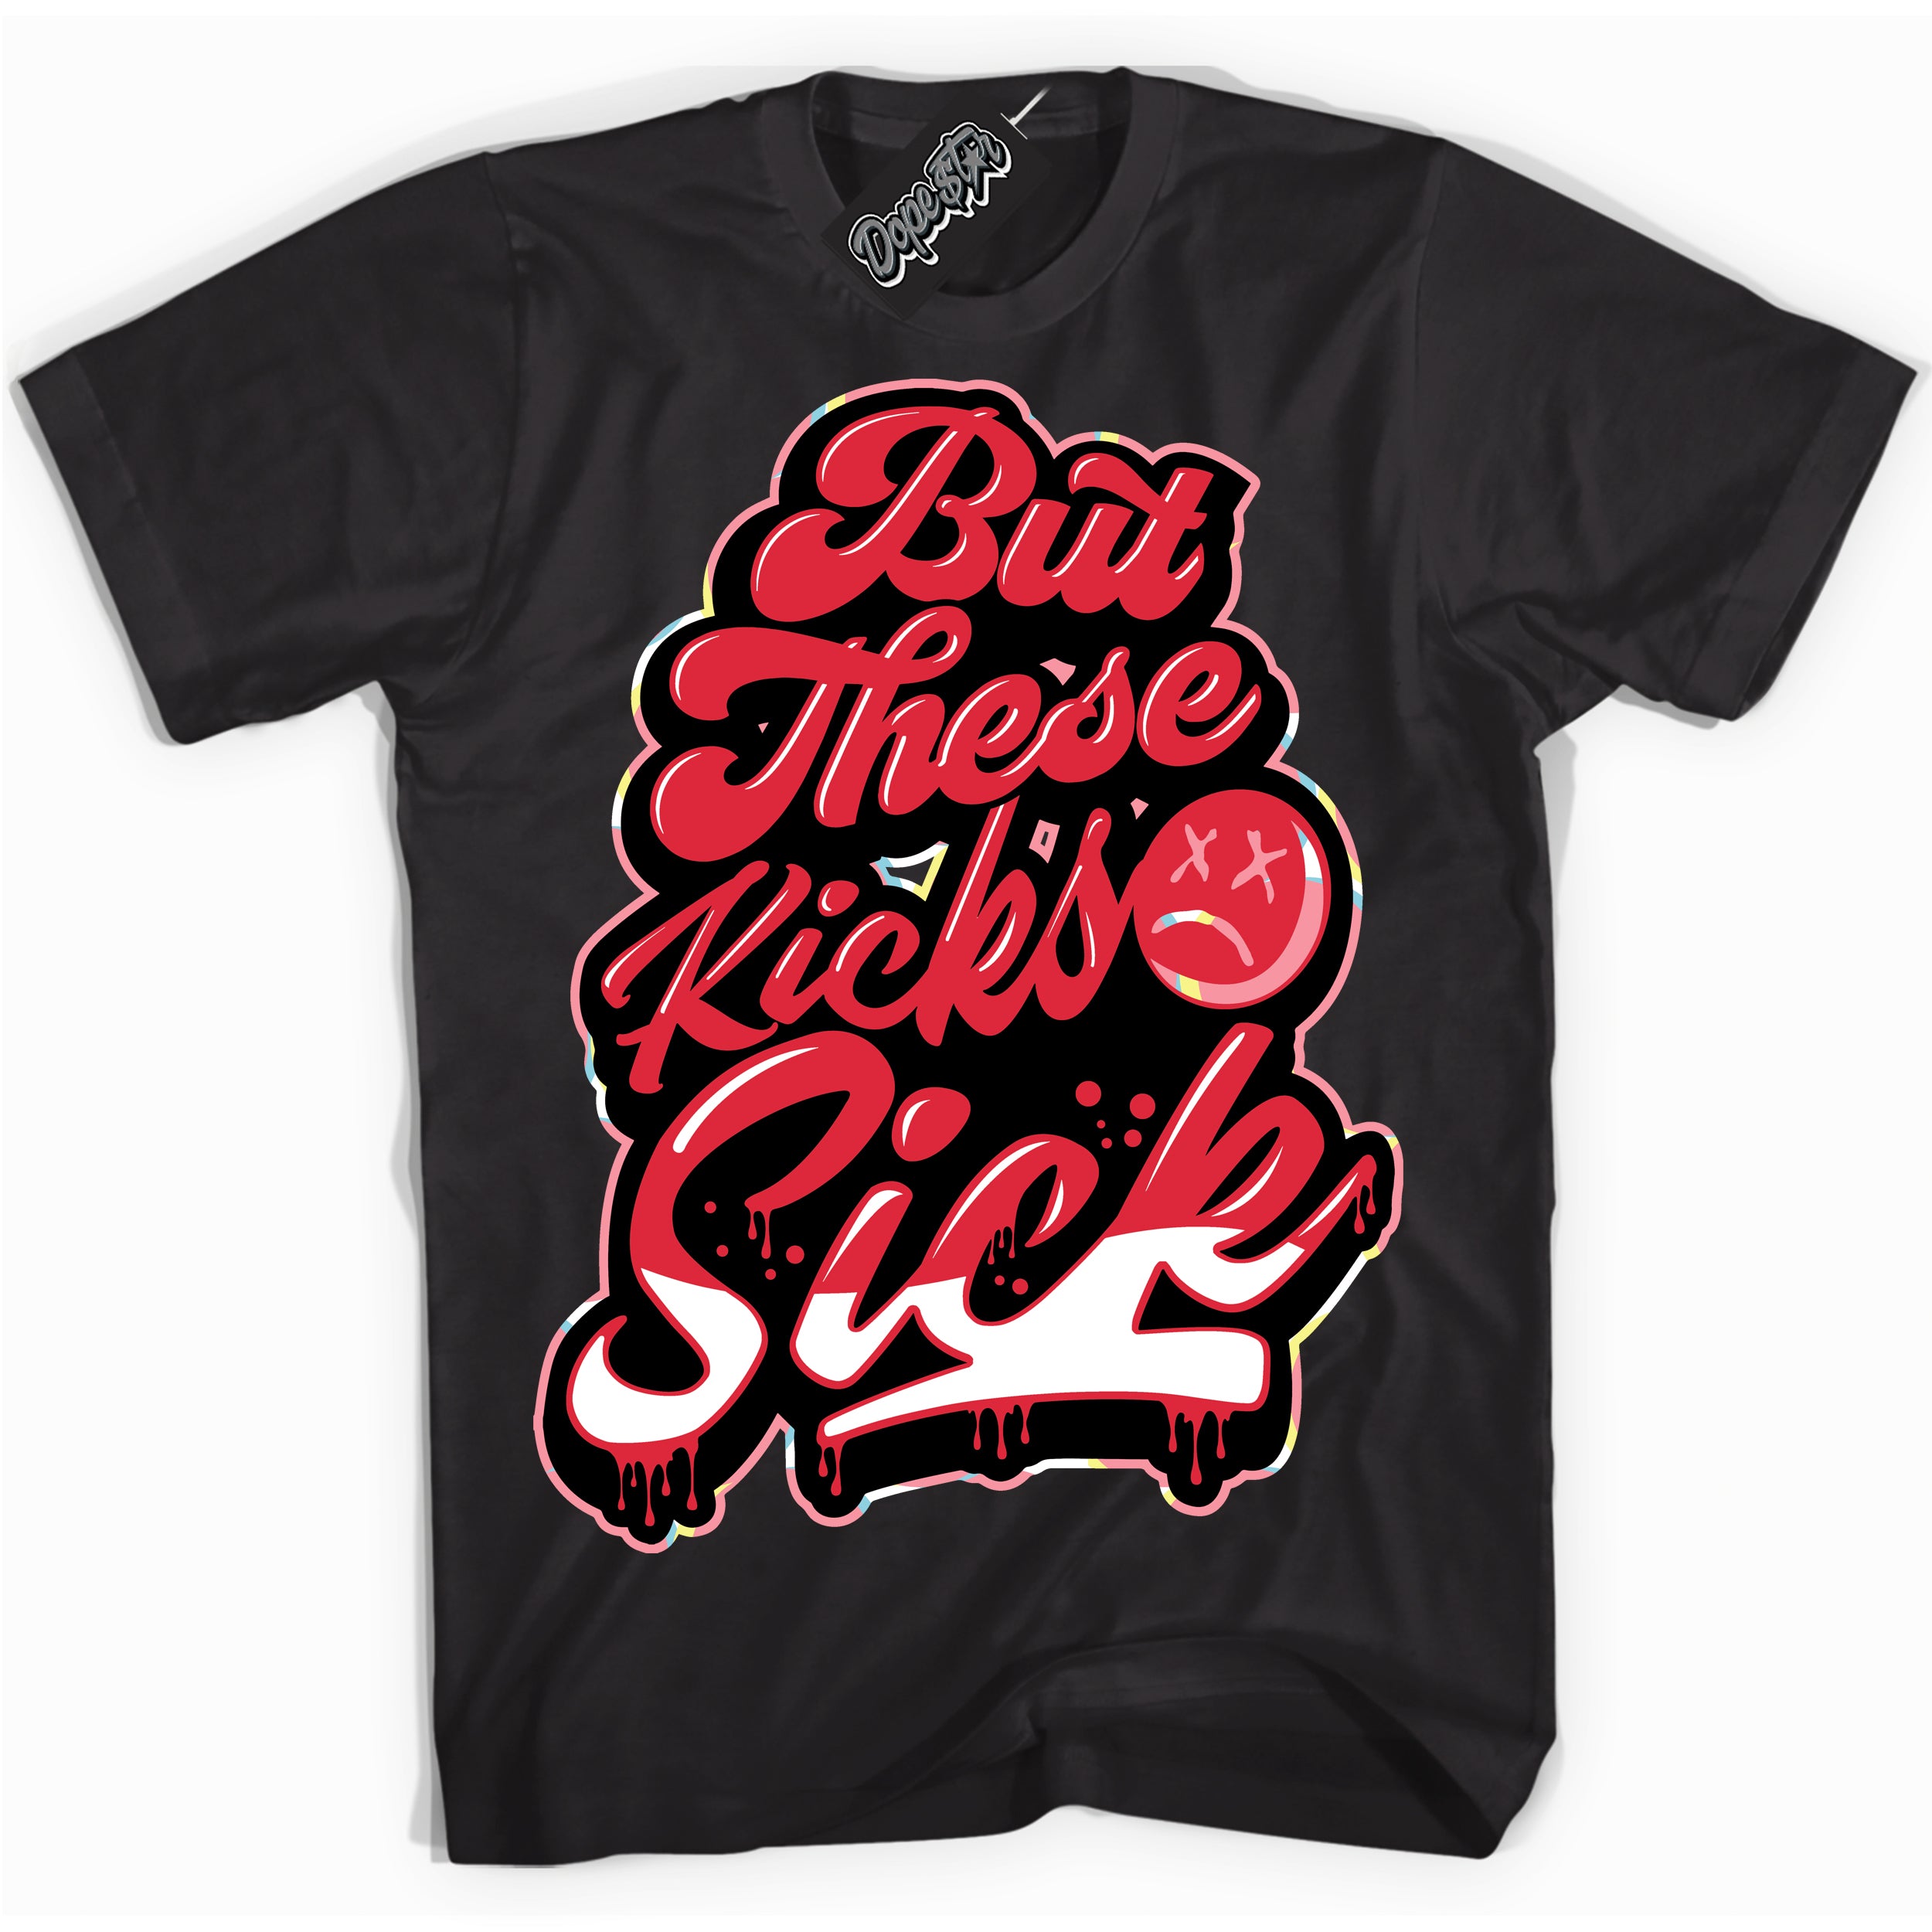 Cool Black graphic tee with “ Kick Sick ” design, that perfectly matches Spider-Verse 1s sneakers 